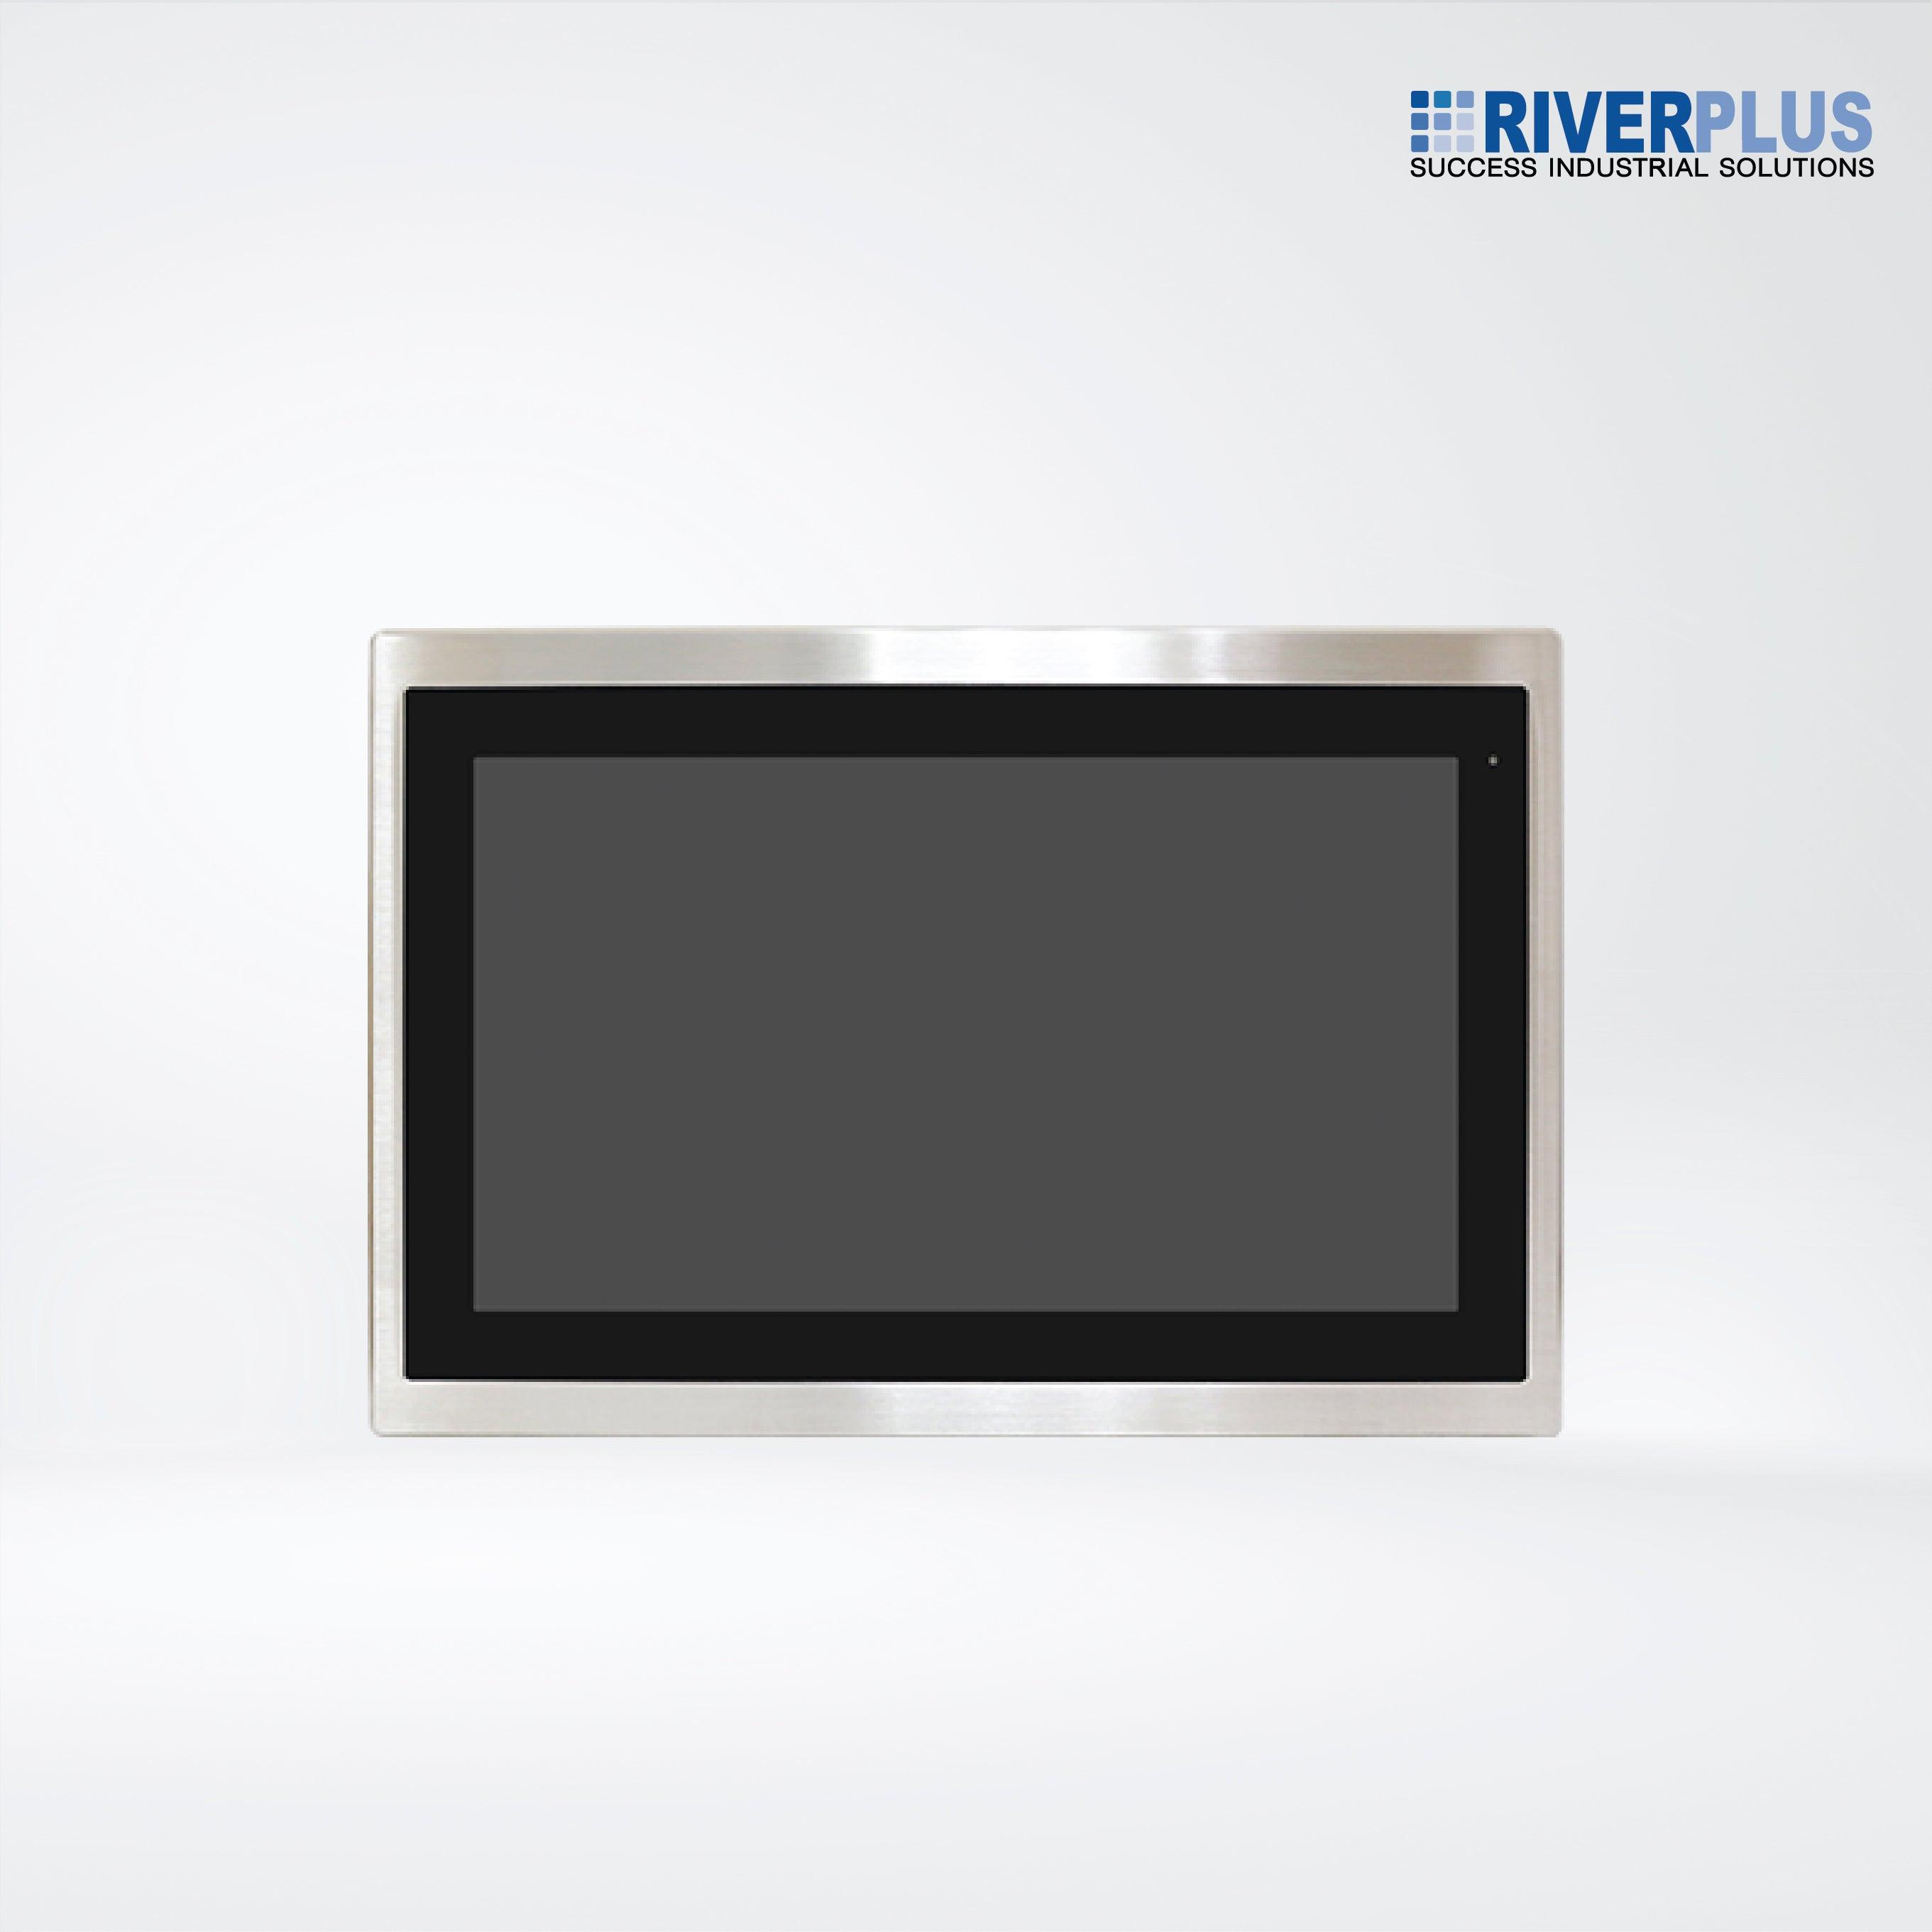 FABS-116GH 15.6” Flat Front Panel IP66 Stainless Chassis Display - Riverplus